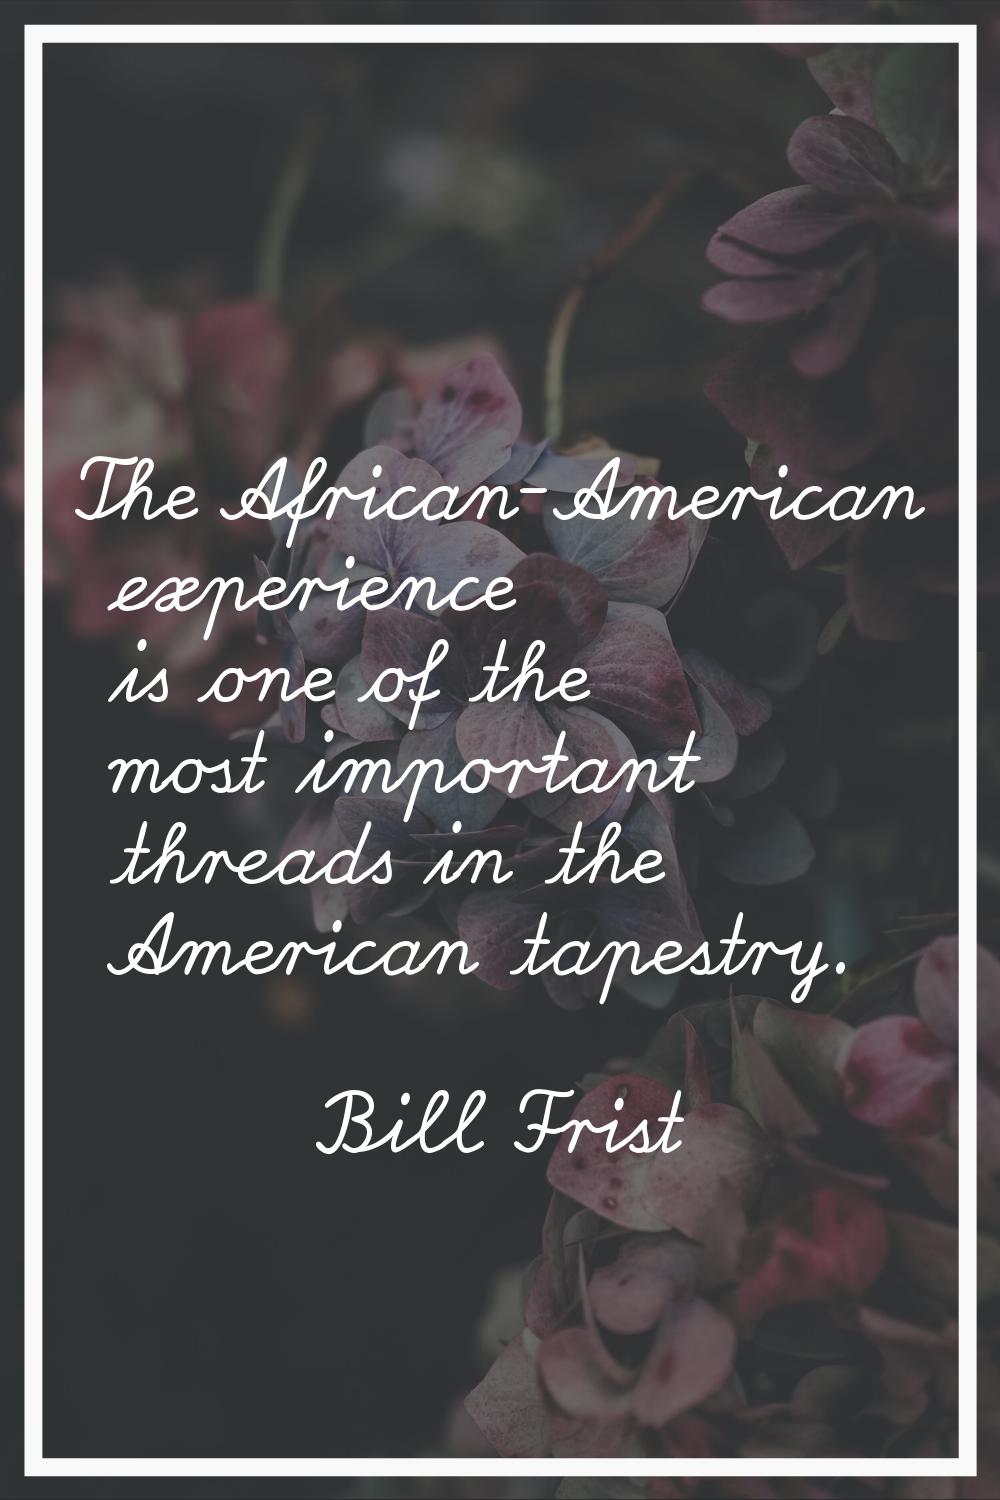 The African-American experience is one of the most important threads in the American tapestry.